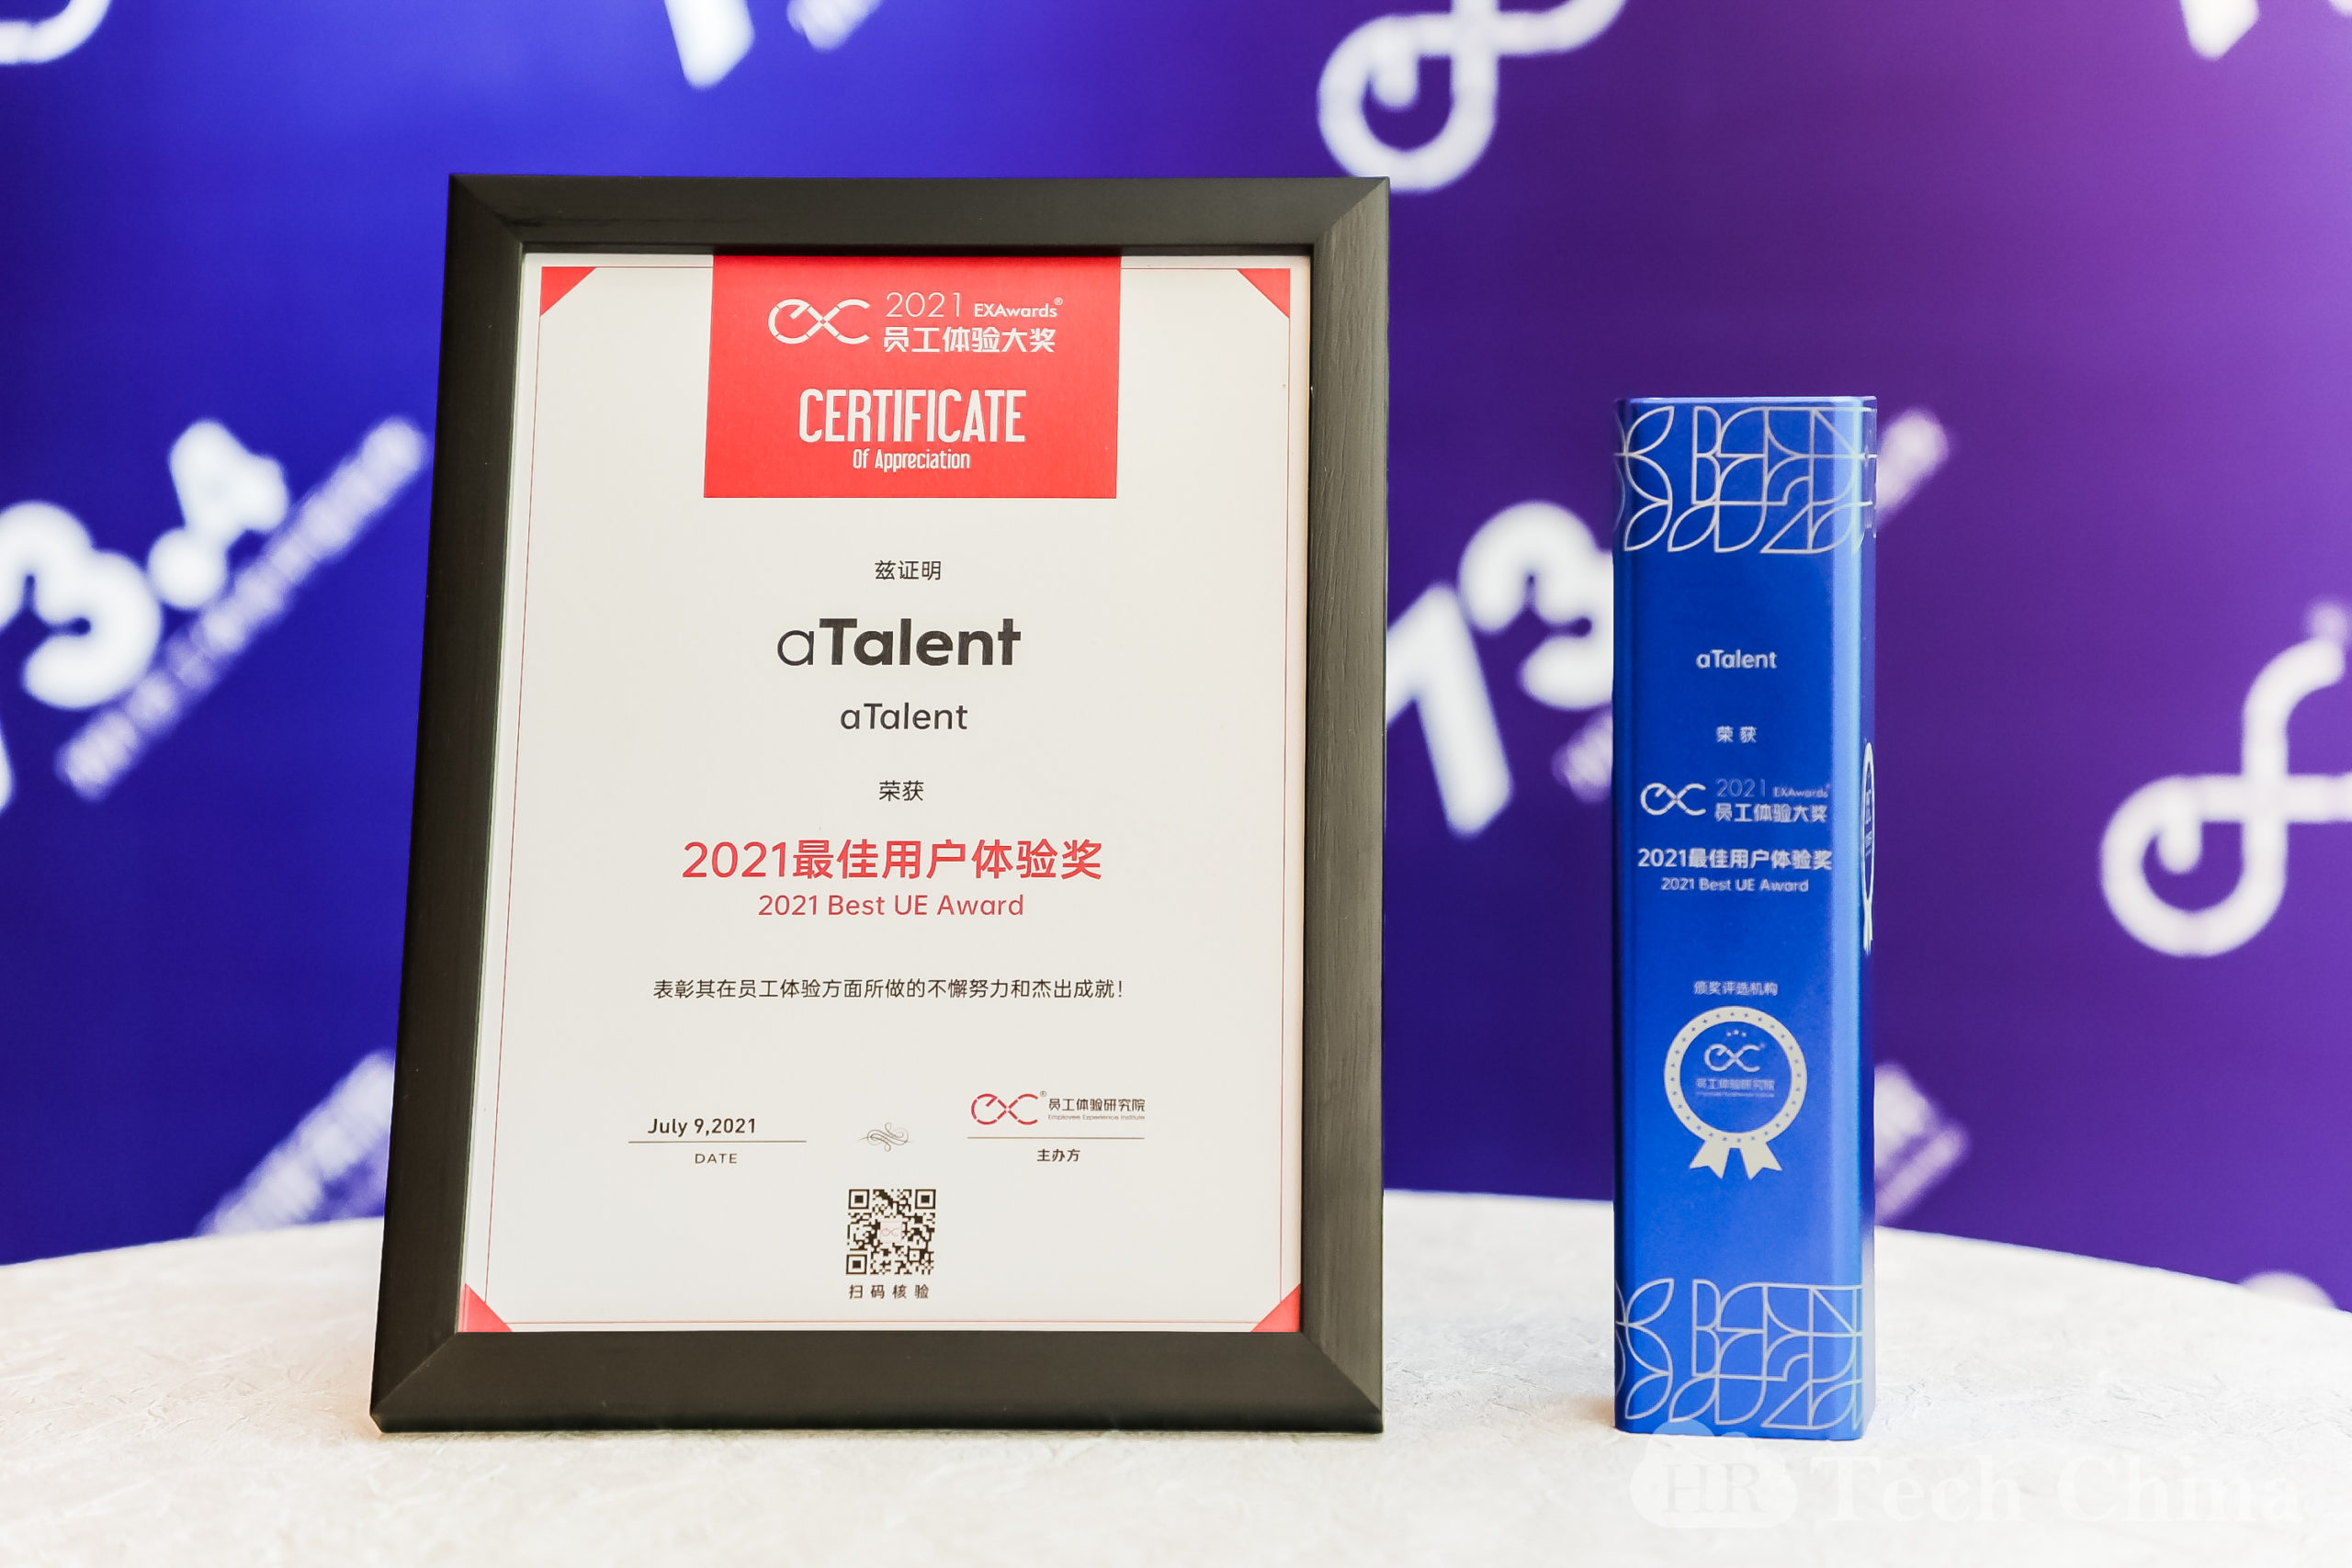 aTalent wins Best EX Award: Strategic focus on improving employee experience to drive business performance growth 2